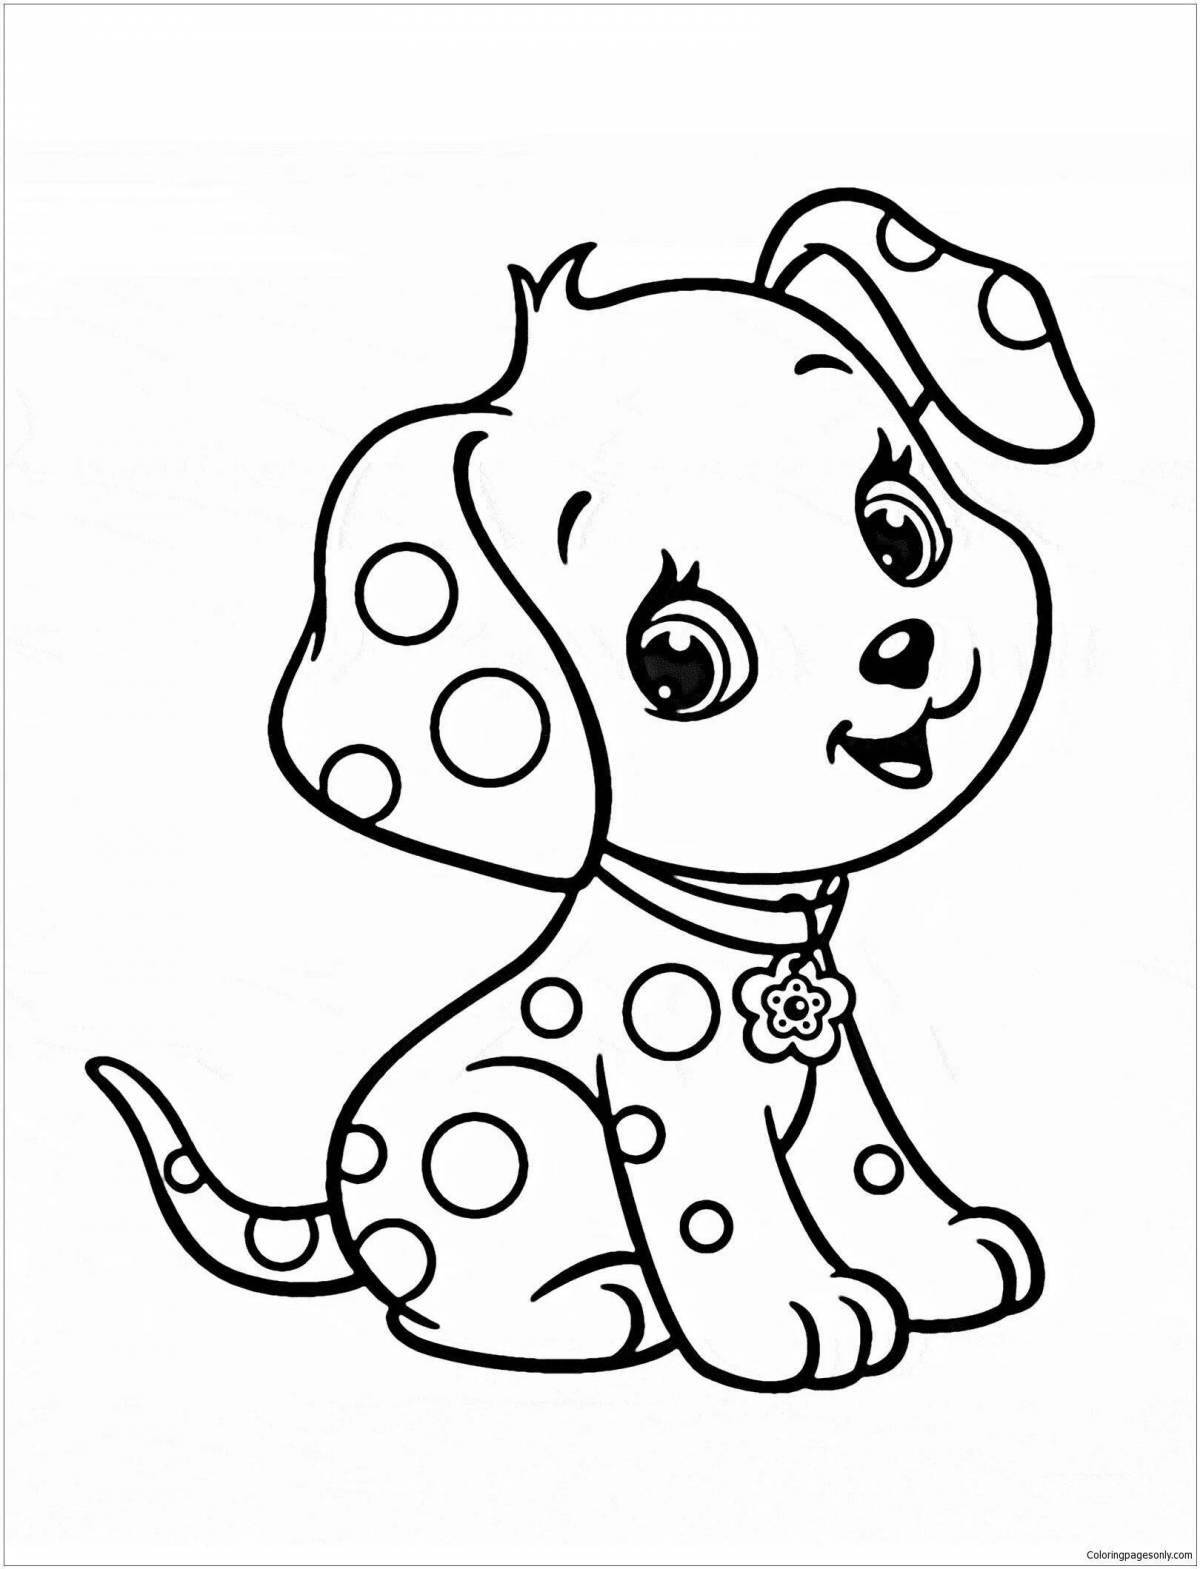 Wagging puppy coloring